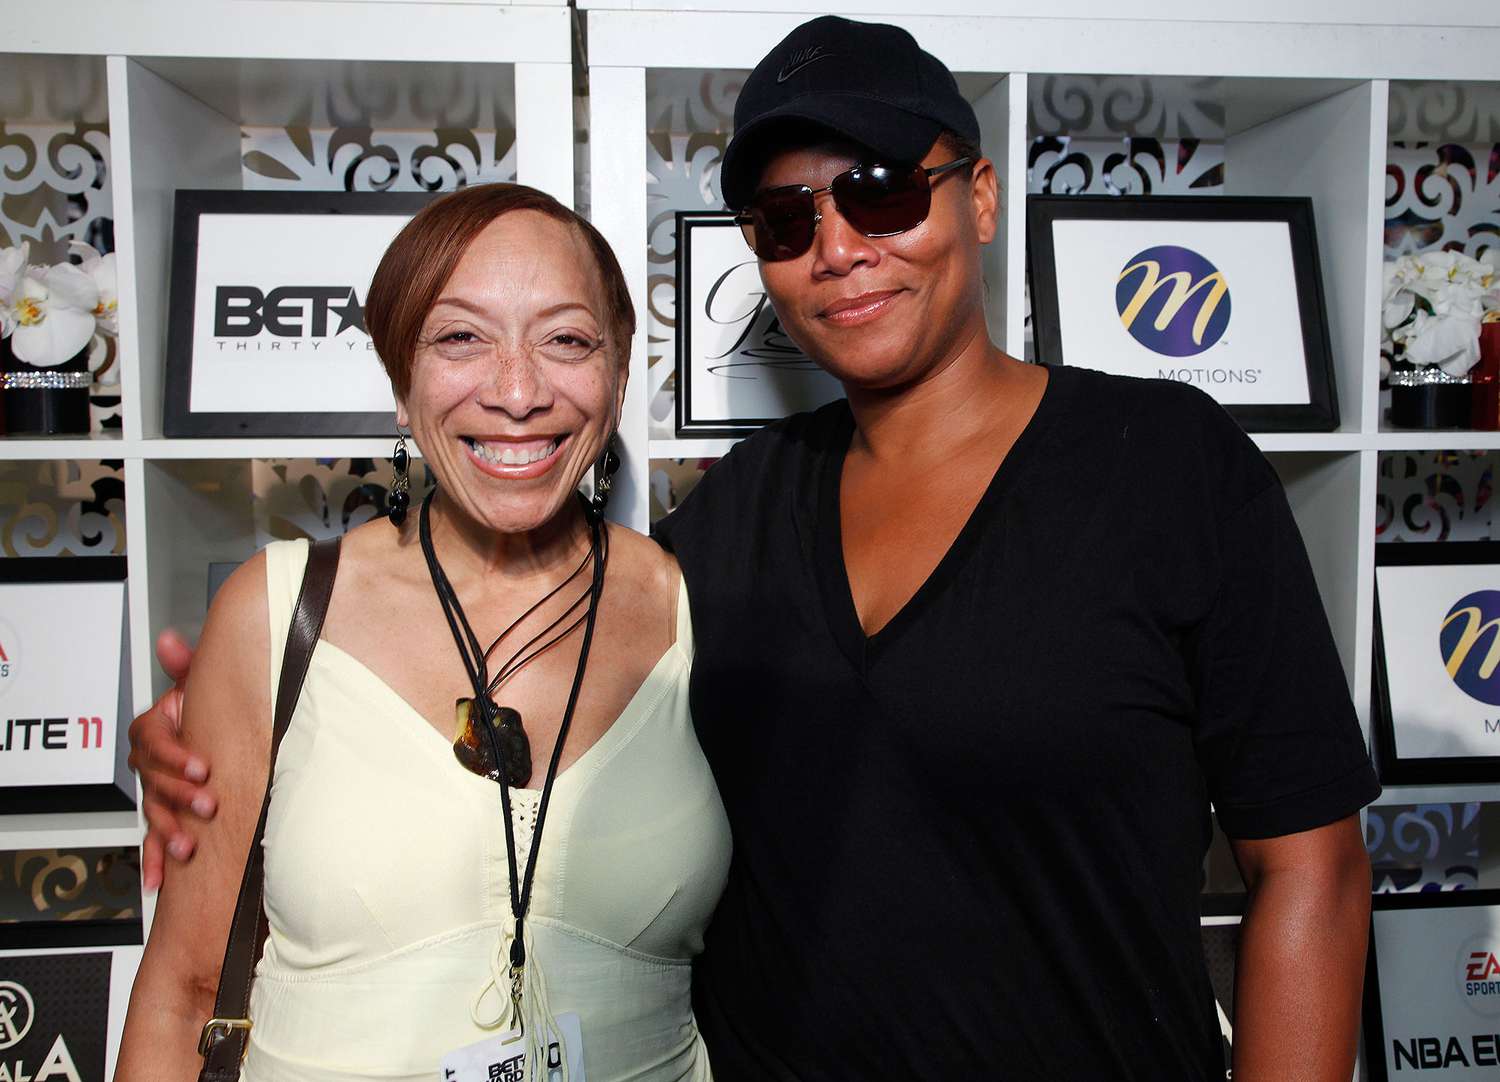 Sweetest Things Queen Latifah Has Said About Her Mother | PEOPLE.com